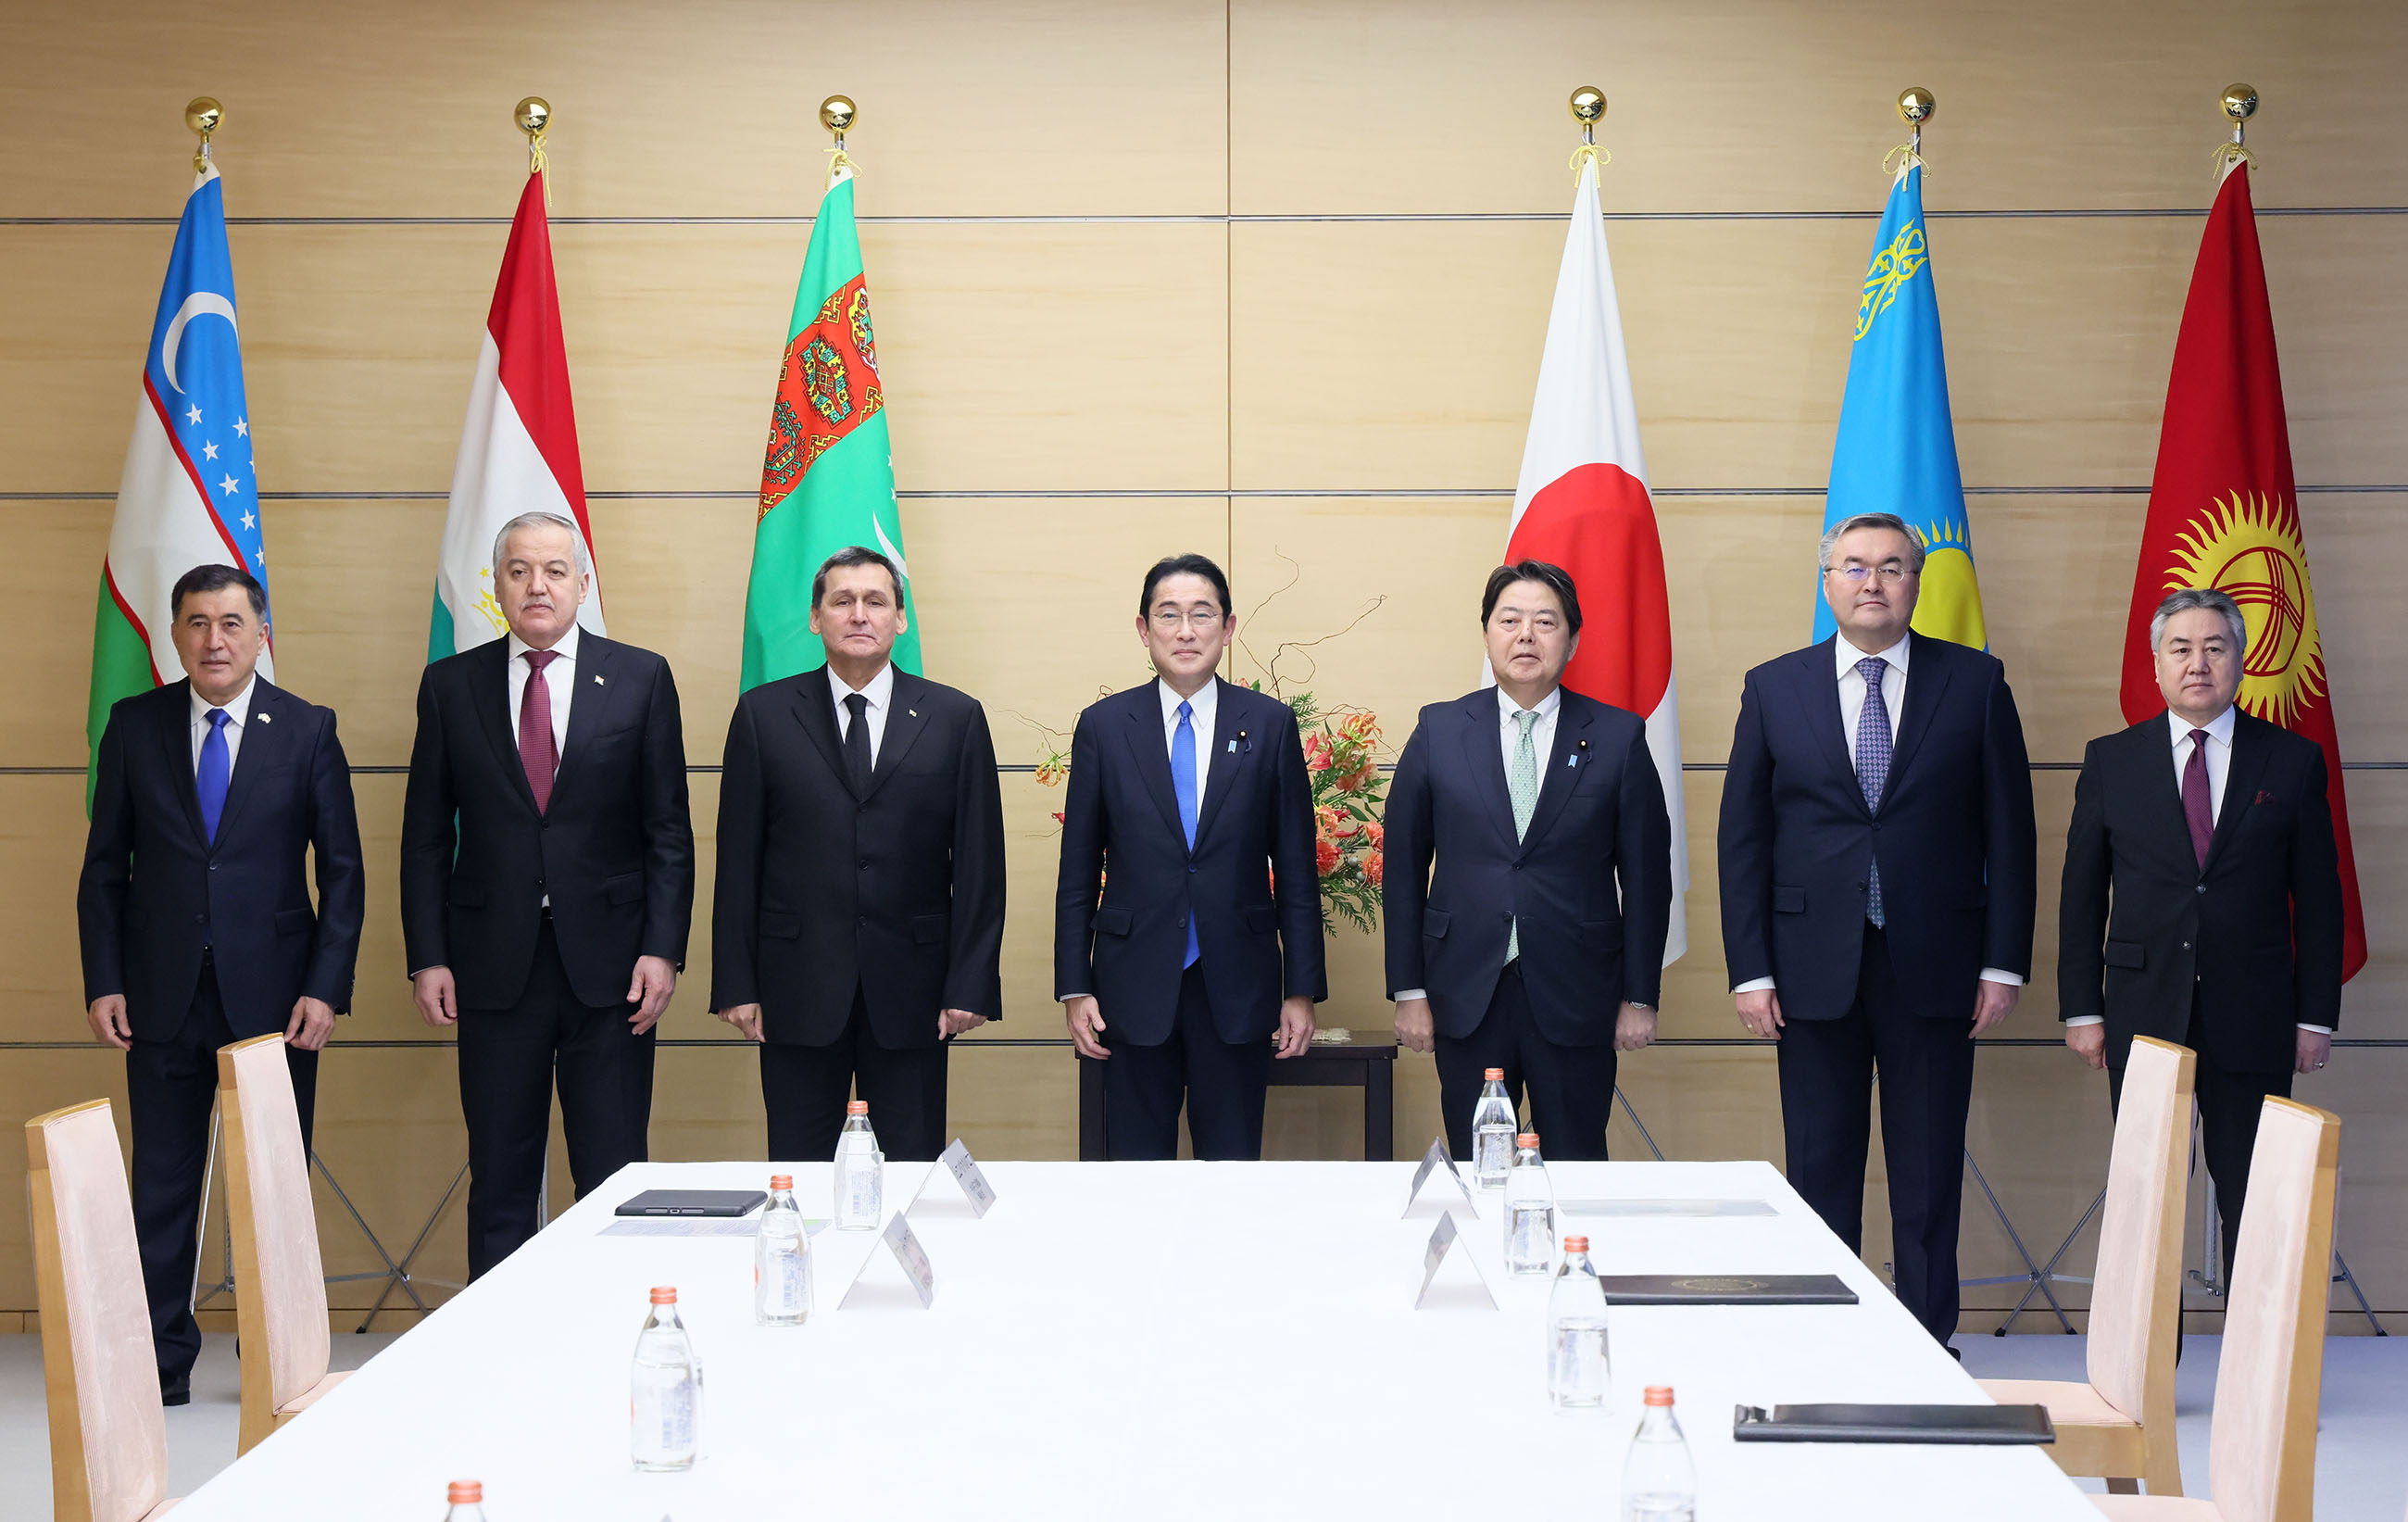 Courtesy Call from the Foreign Ministers of the Five Central Asian Countries